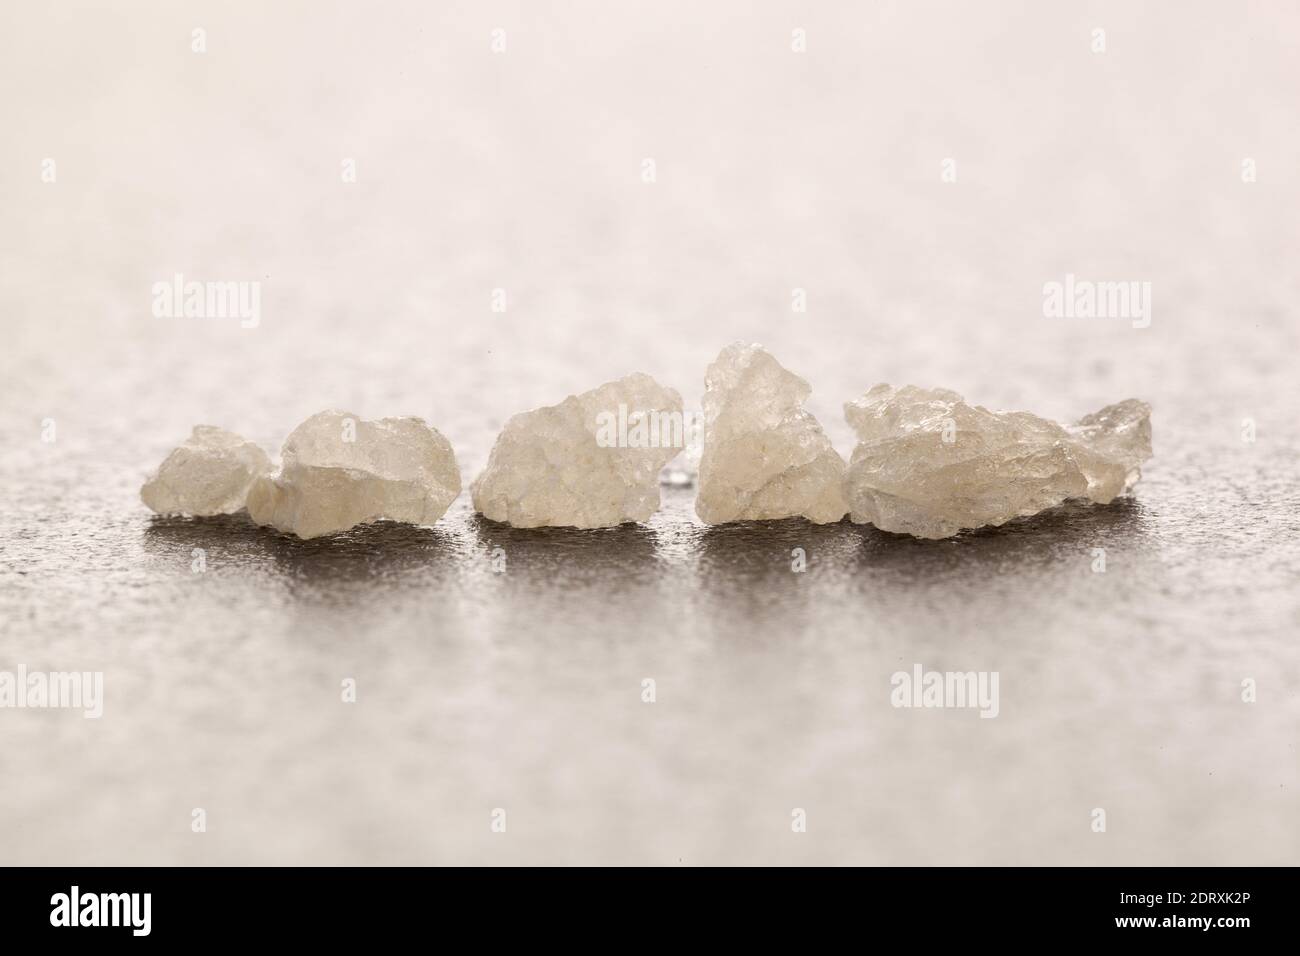 Ecstasy crystals close-up. MDMA-Assisted Psychotherapy. Stock Photo